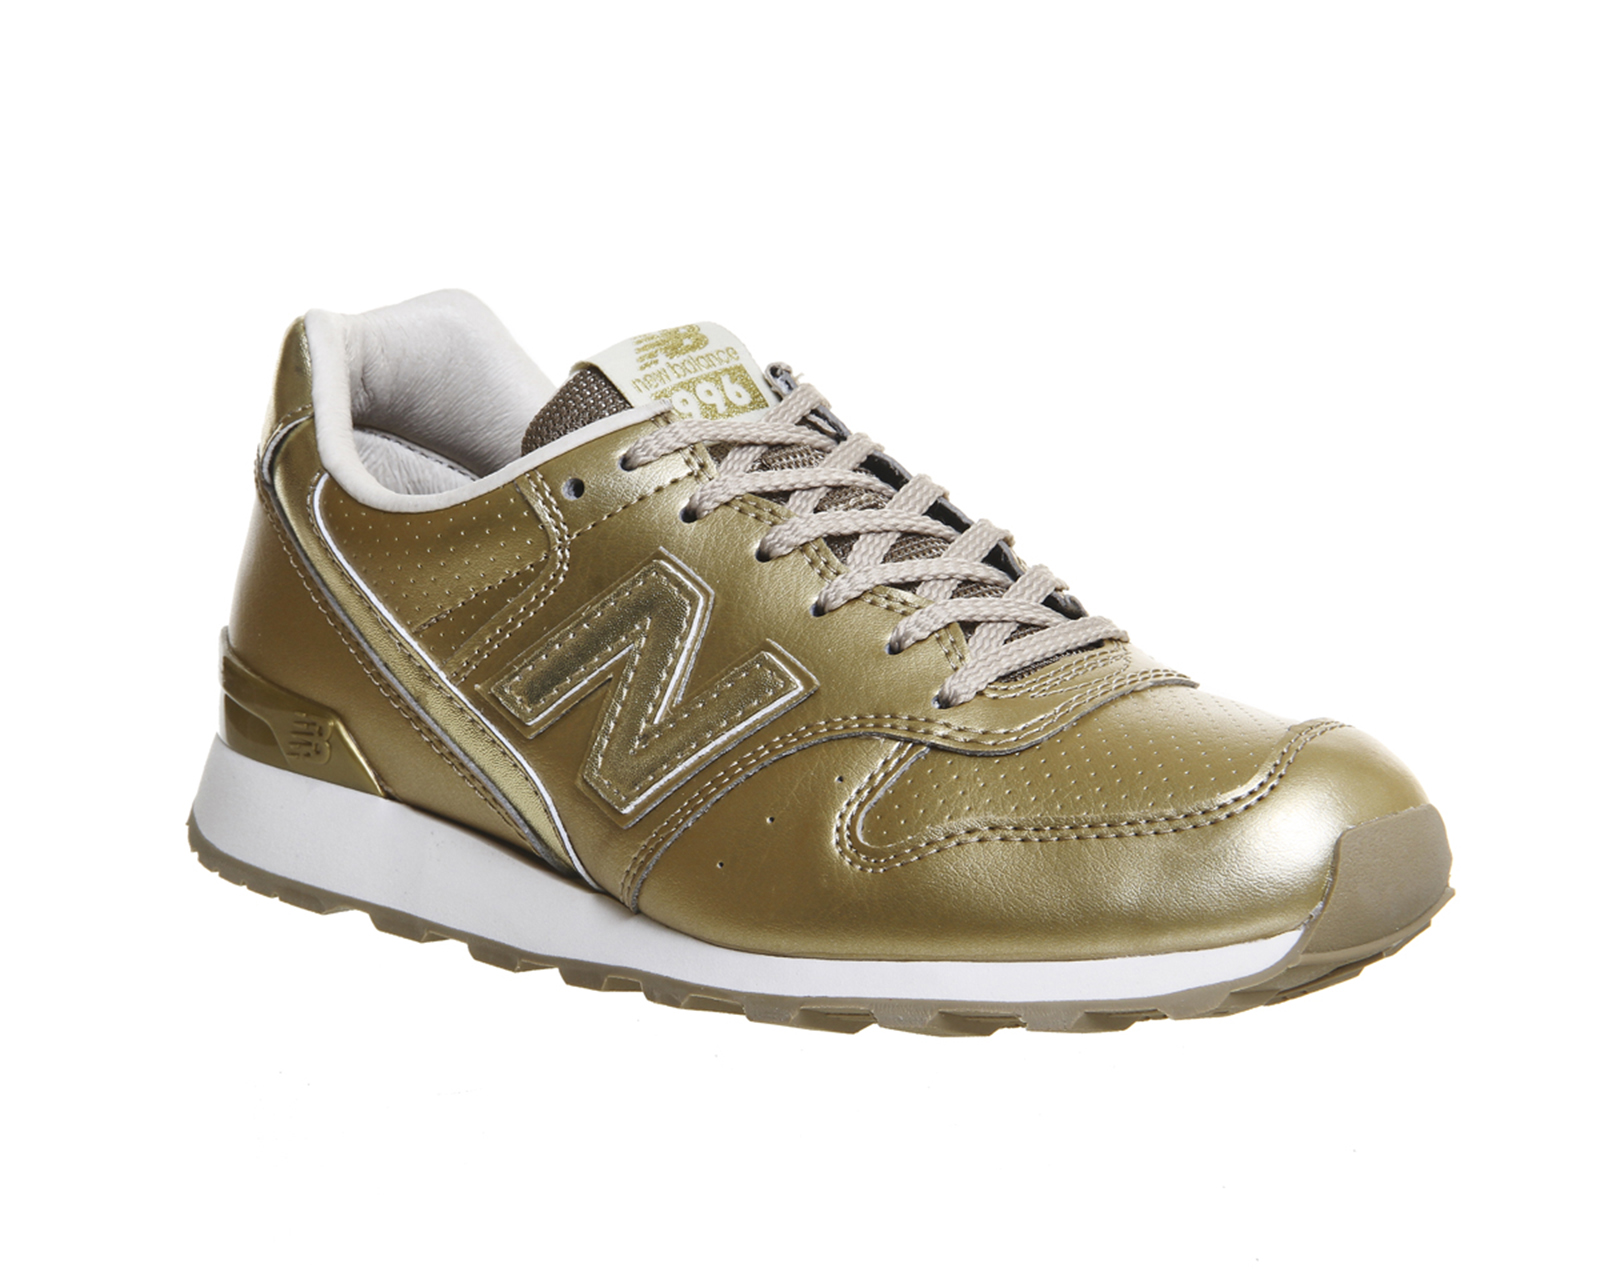 New Balance 996 Gold Mono - Hers Exclusives